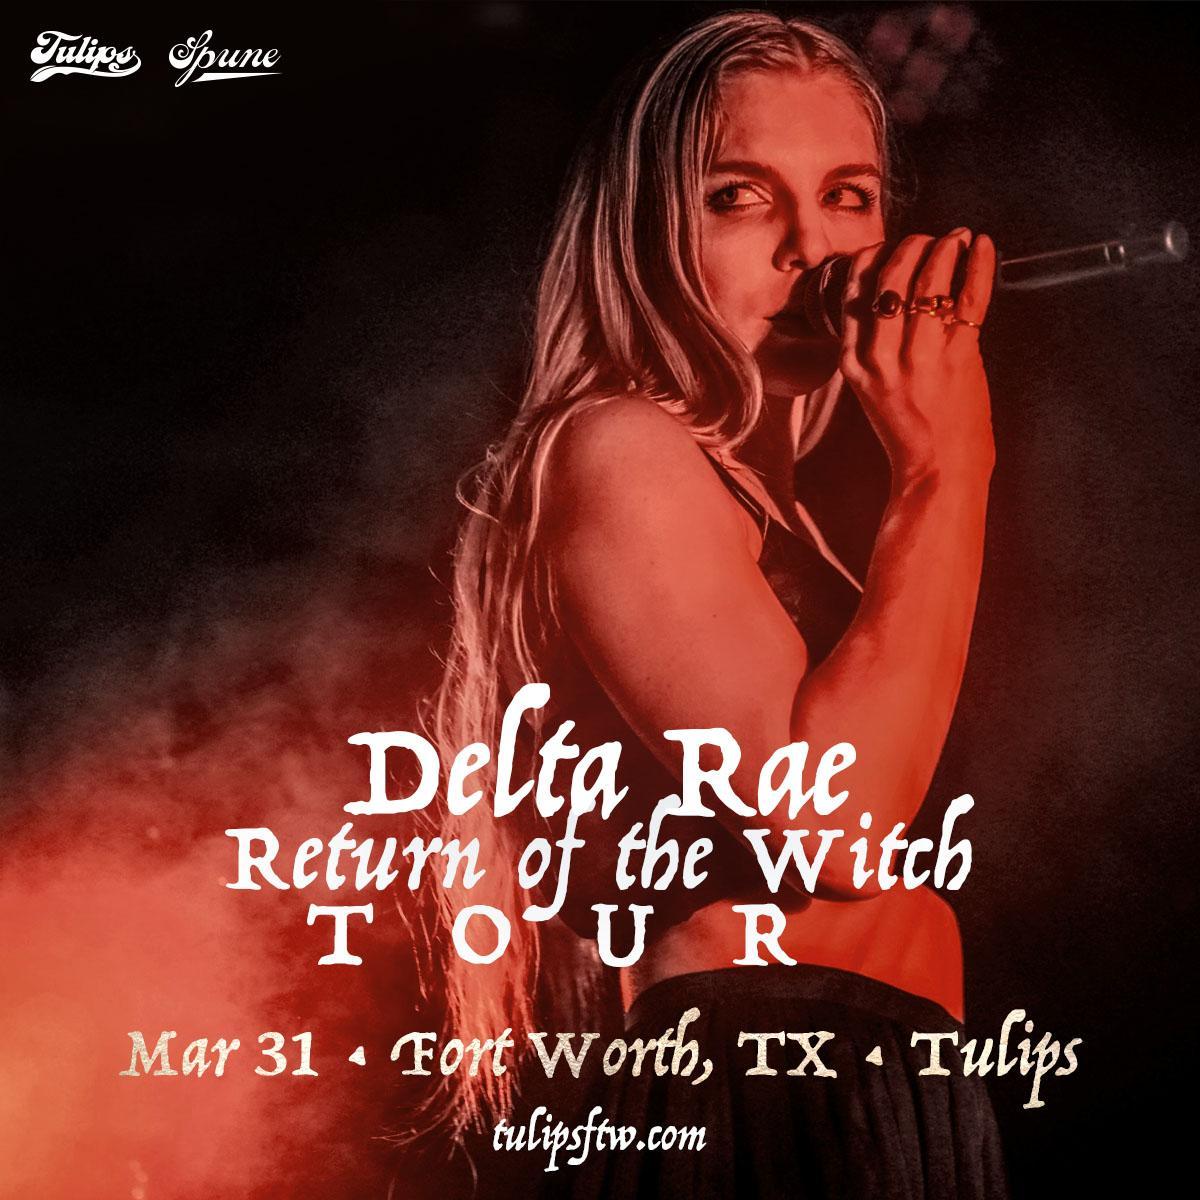 Delta Rae - Return of the Witch Tour | Tulips